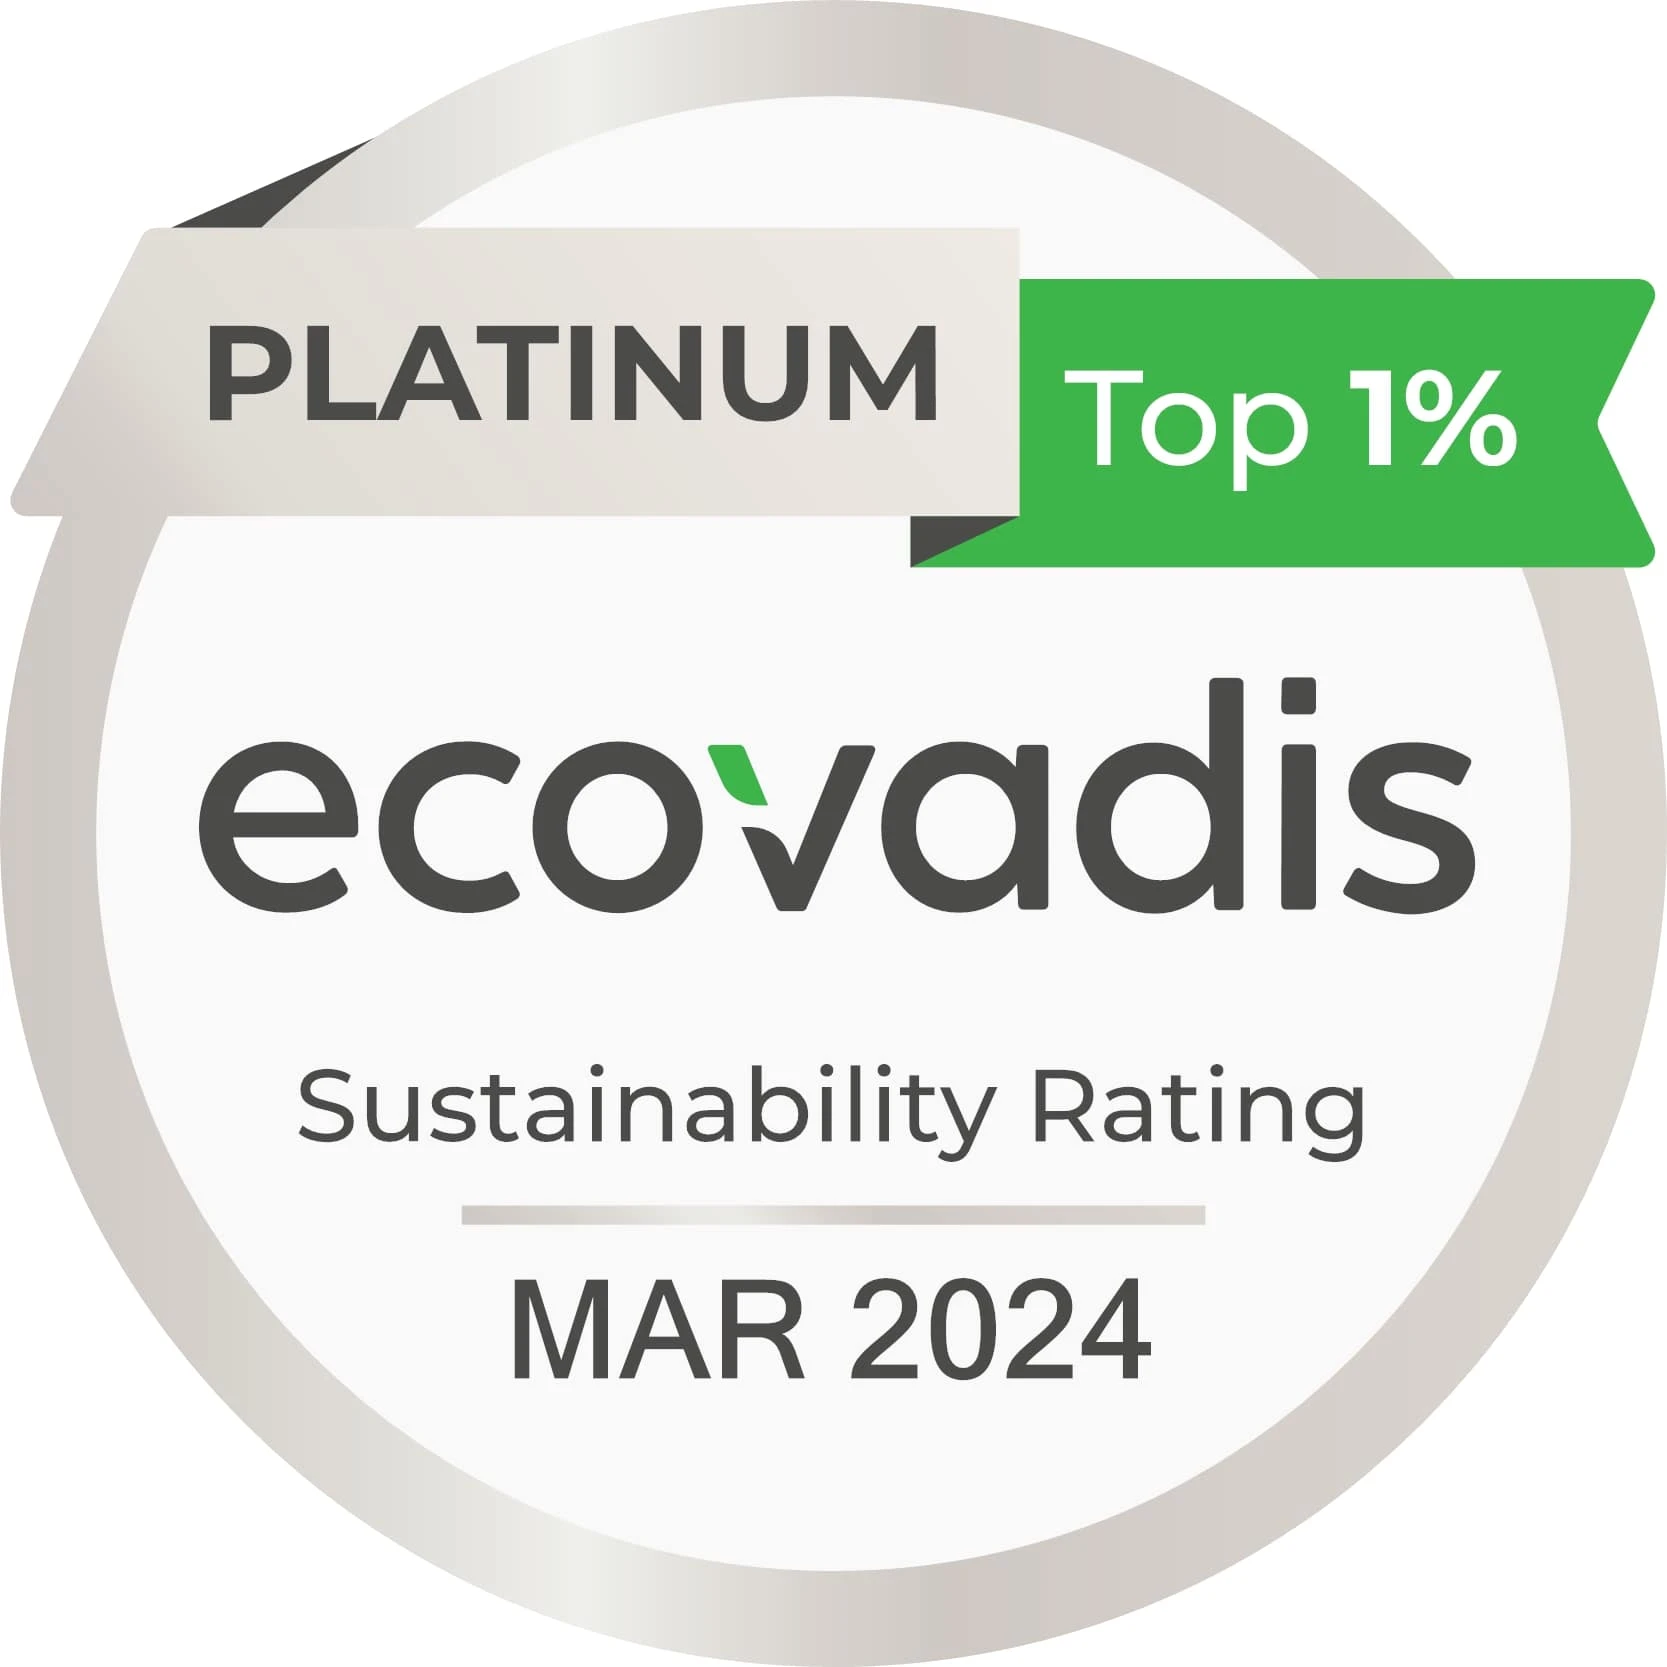 Platinum medal from EcoVadis sustainability rating 2024